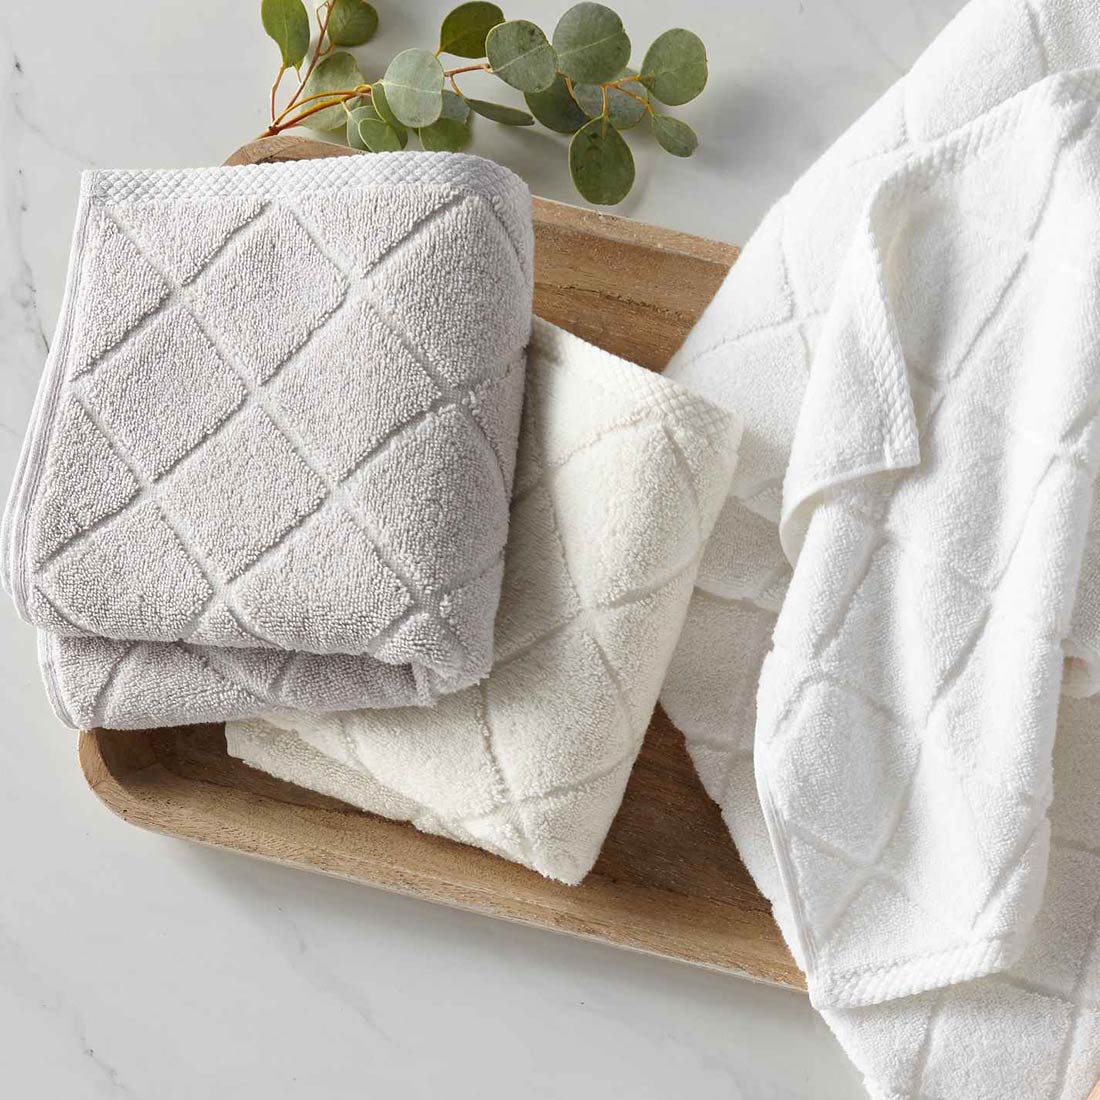 Luxury Towels: How to Choose the Best Quality Bath Towels